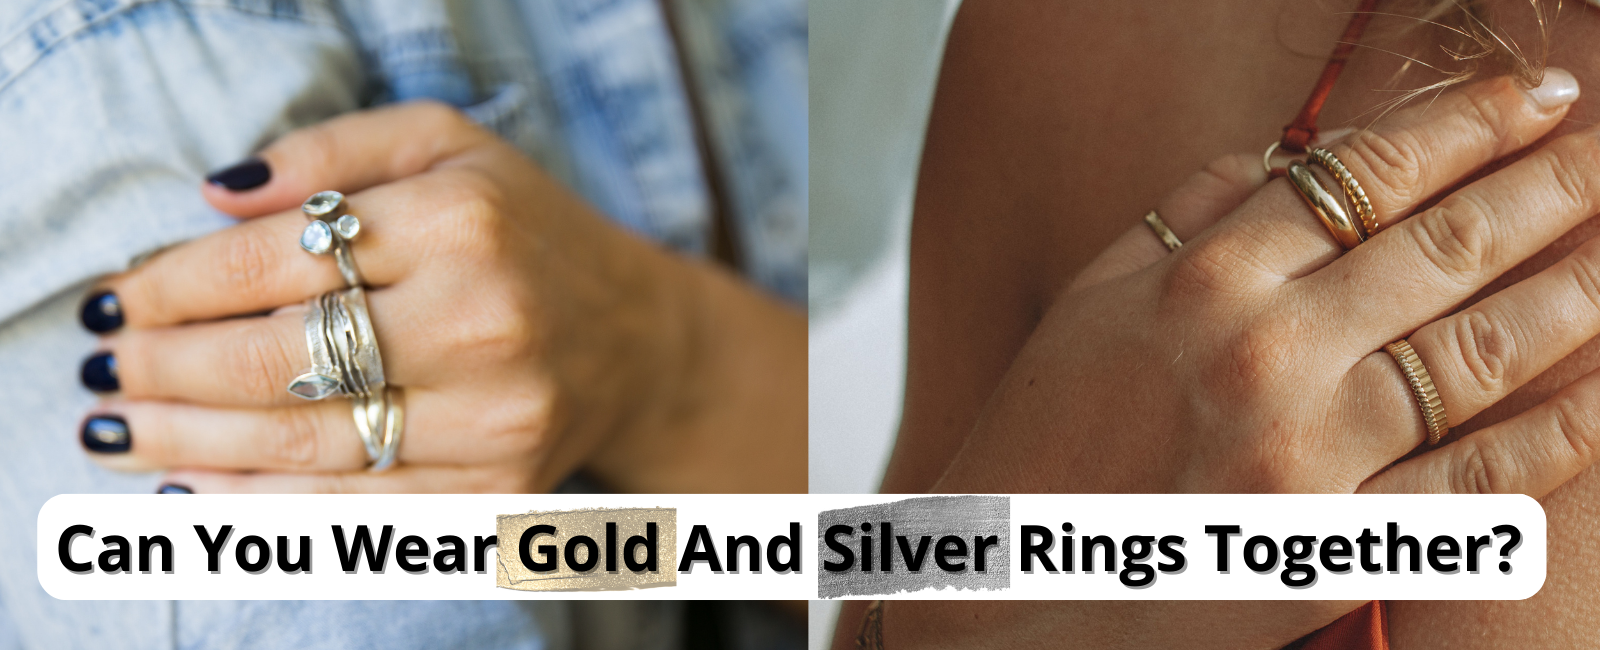 Can You Wear Gold And Silver Rings Together?